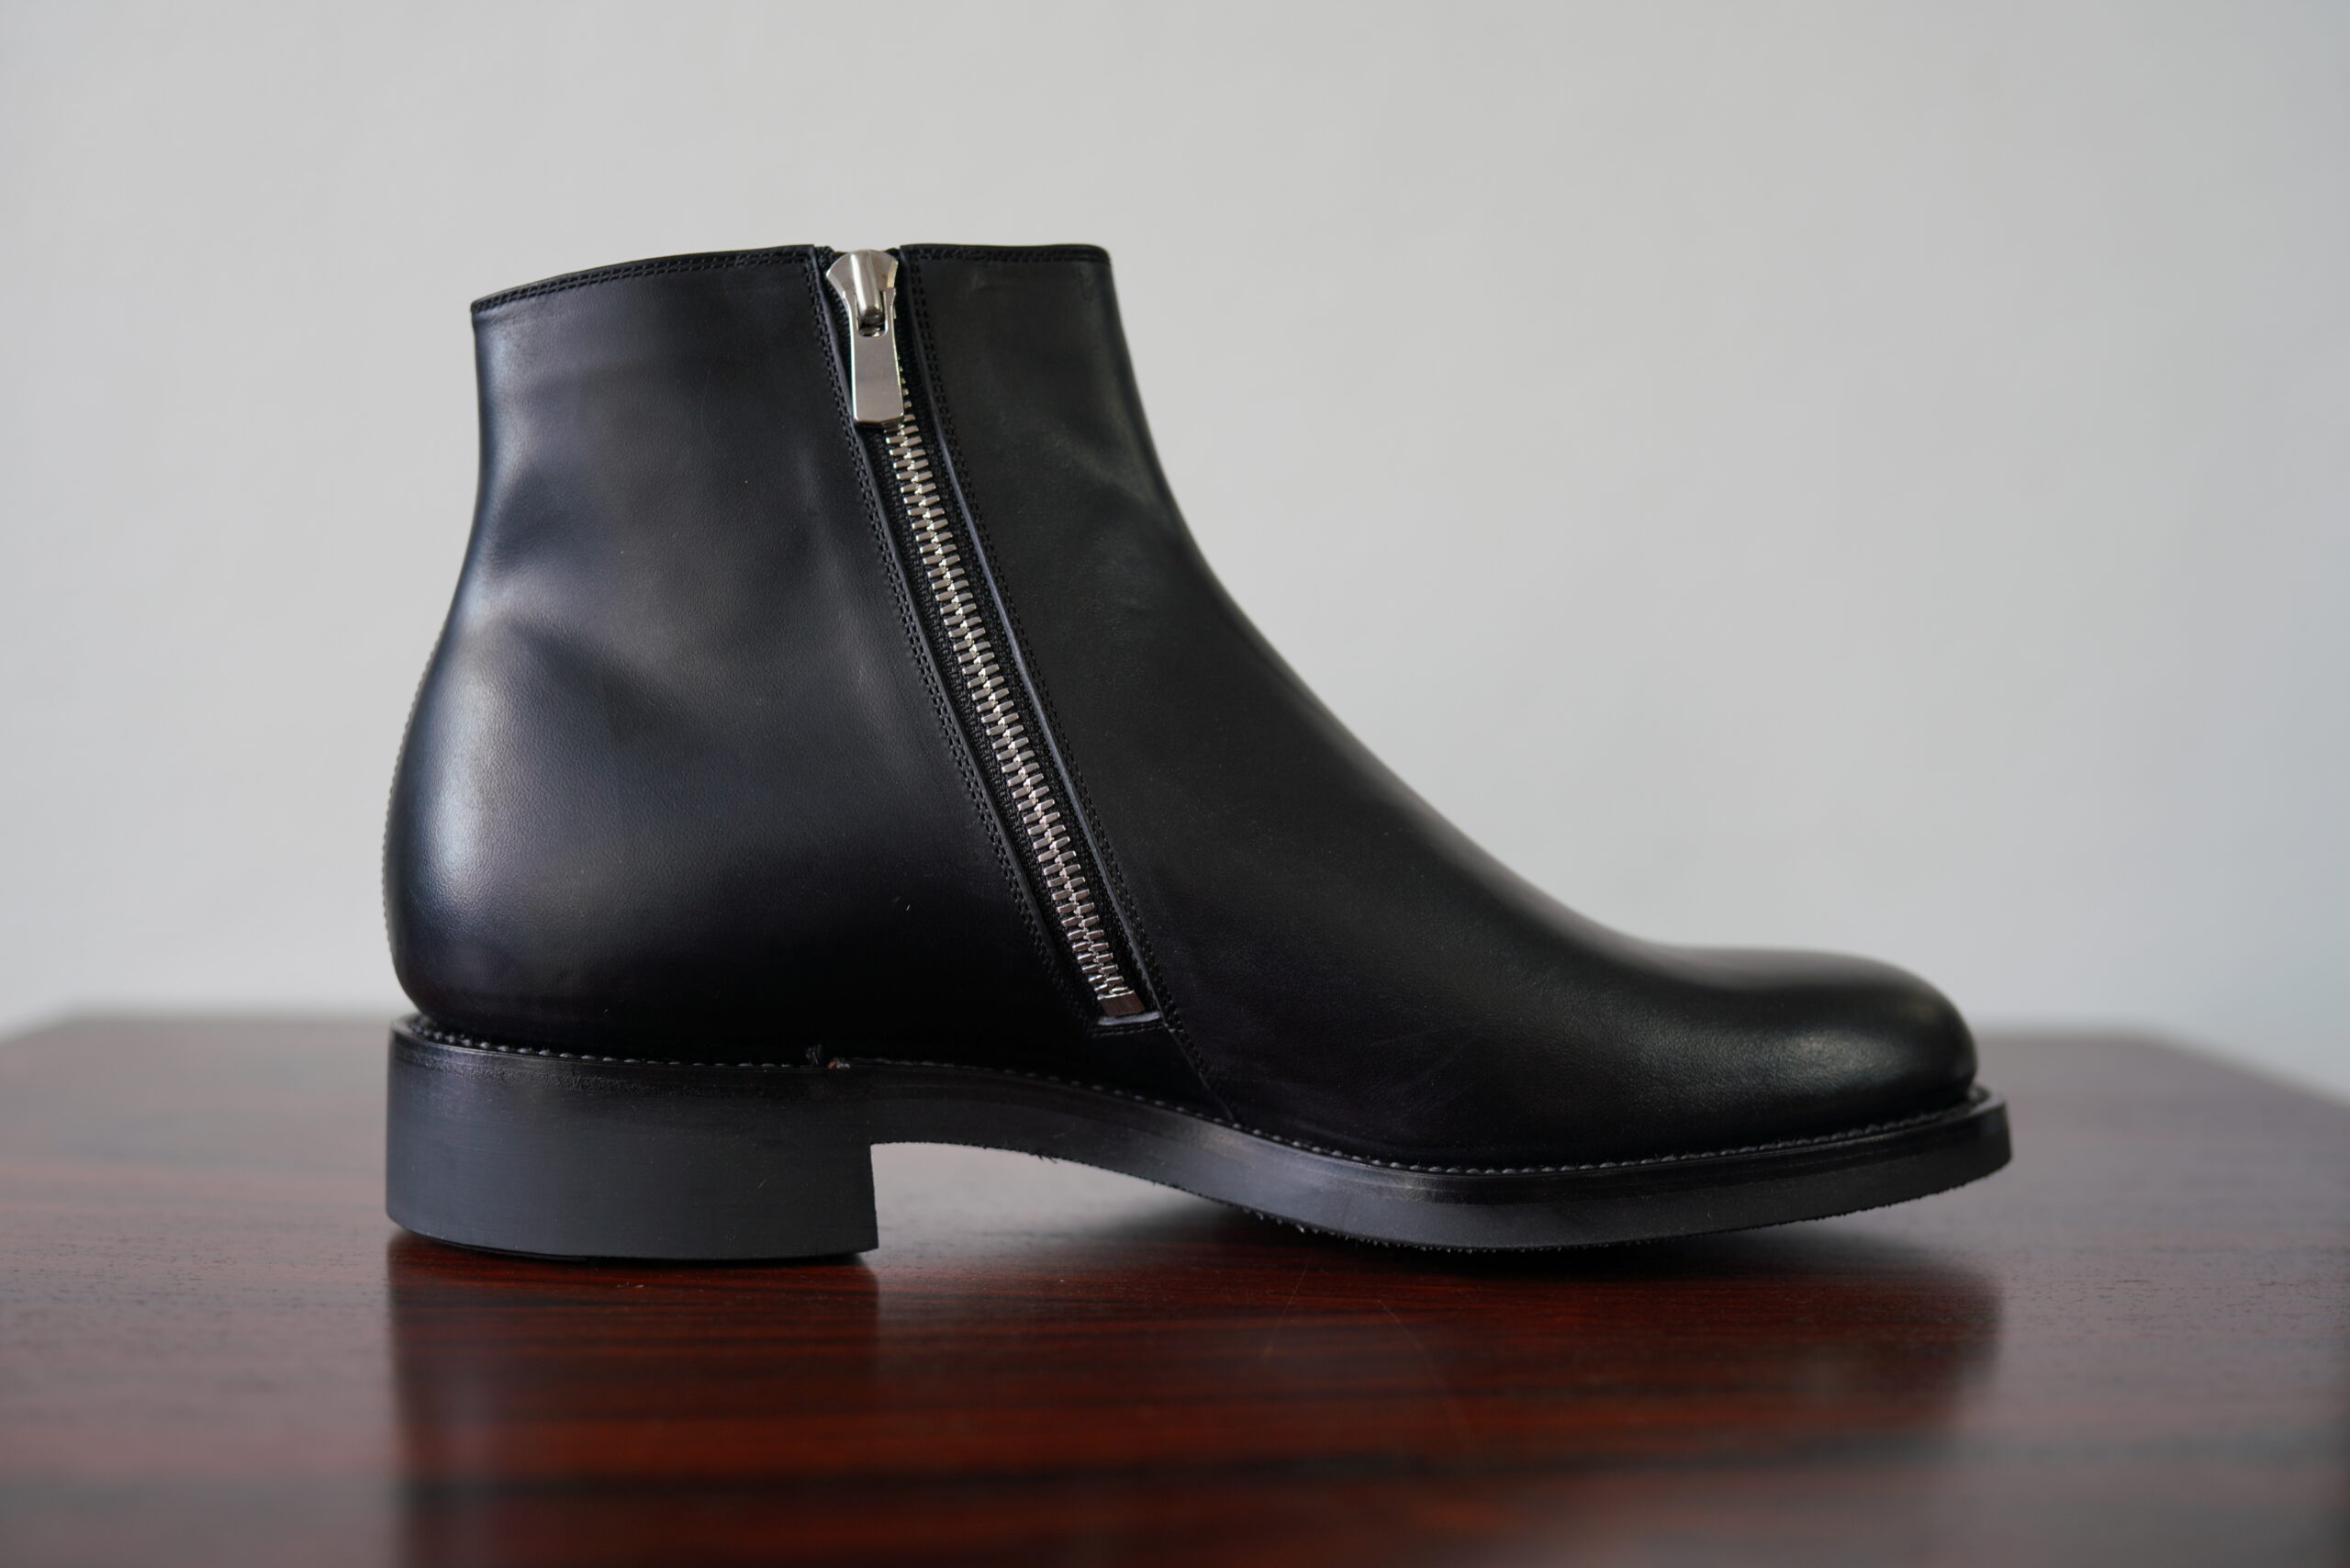 forme/”Molder”side zip boots class/フォルメ21awサイドジップブーツ 